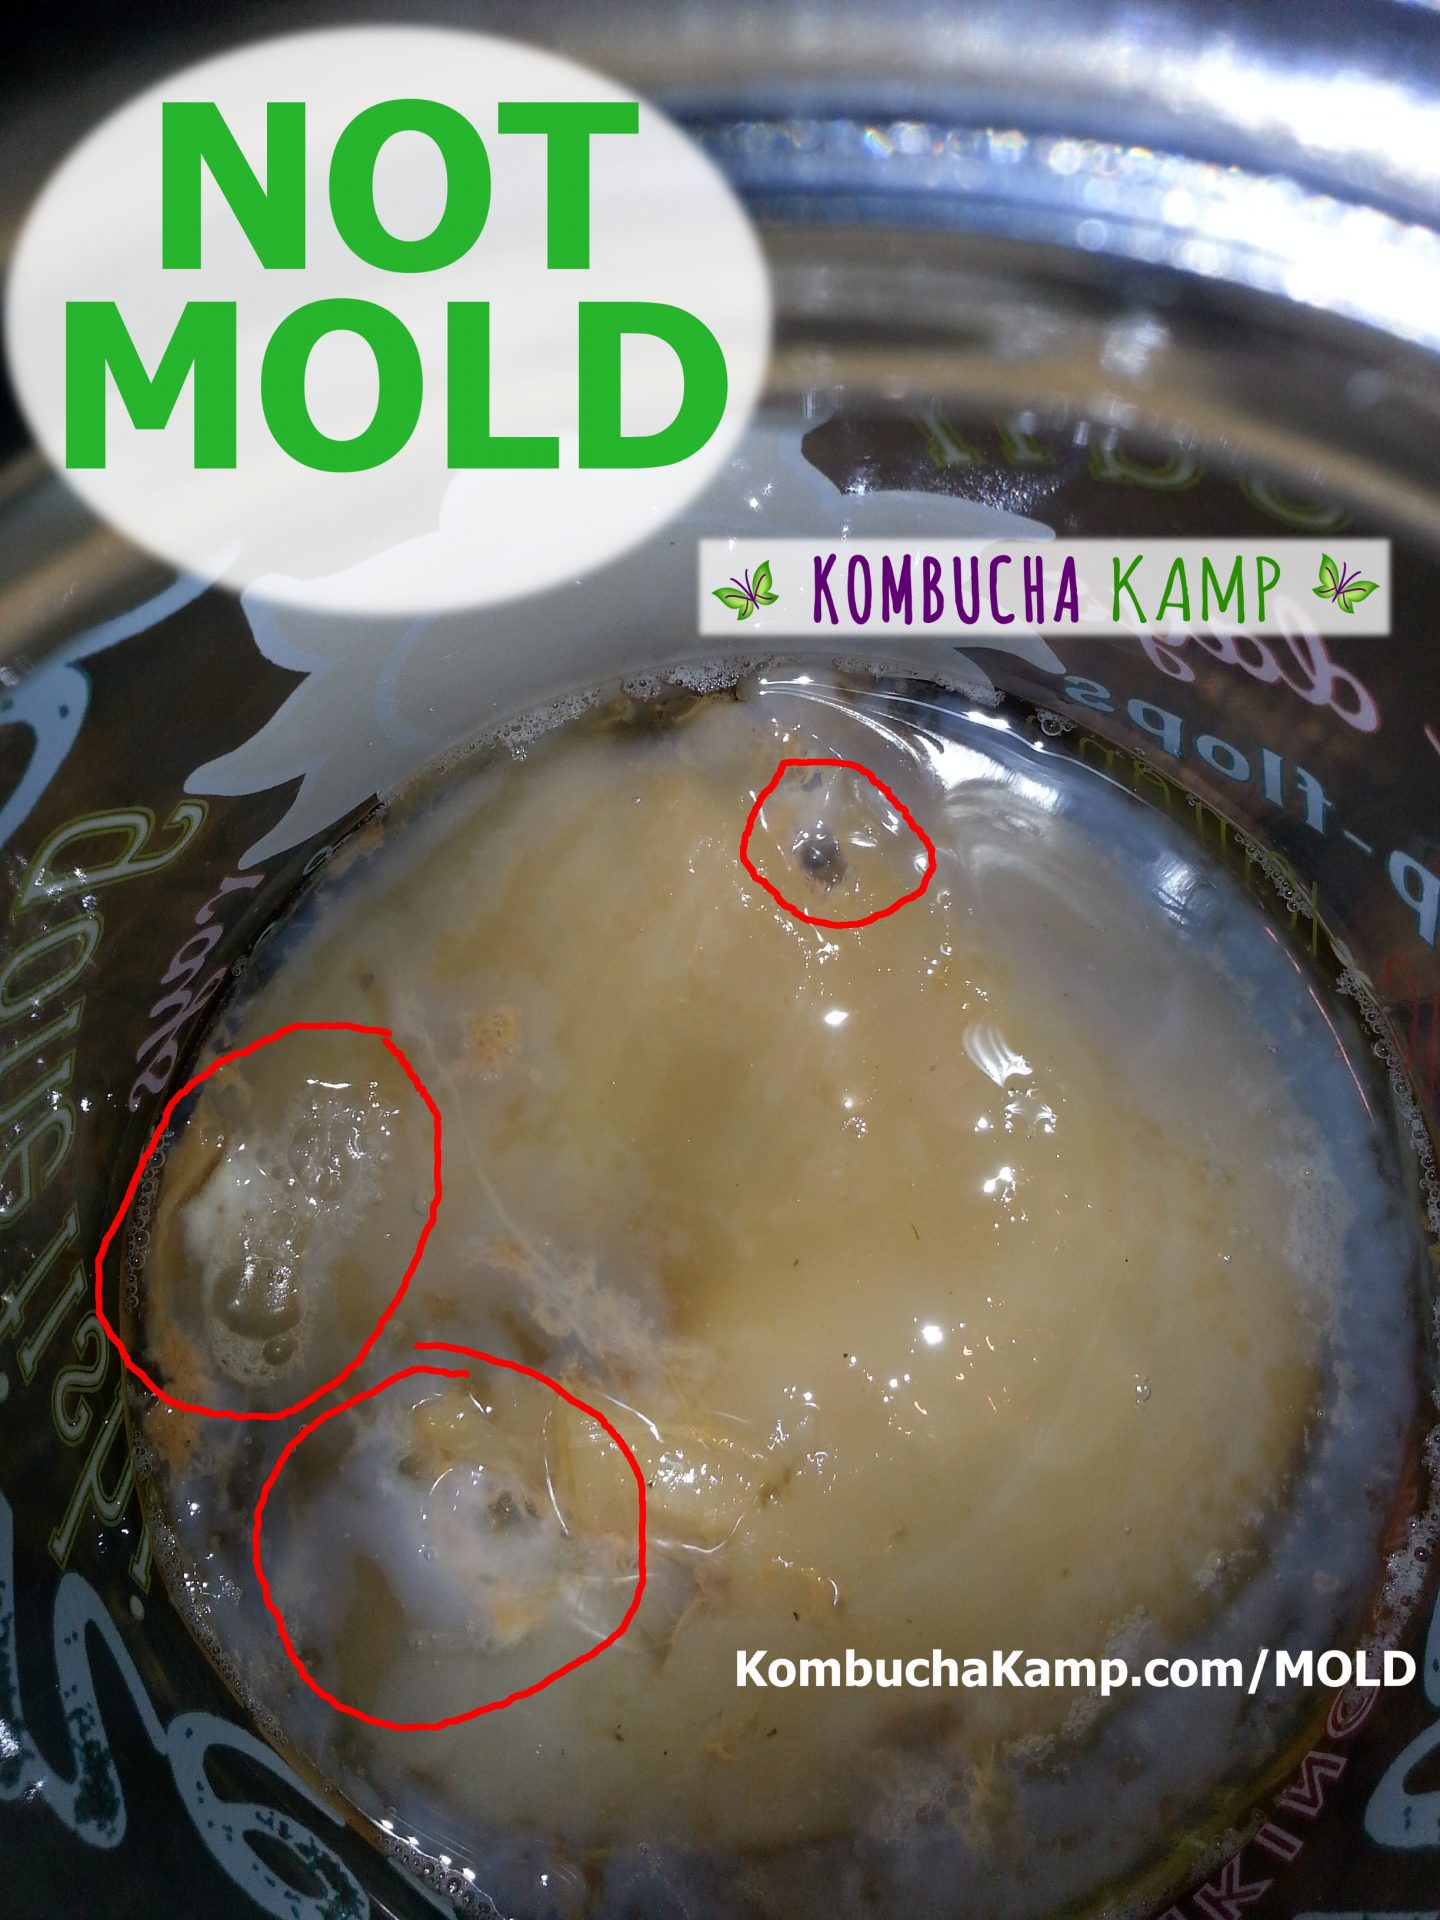 New young Kombucha SCOBY forms in white areas around the original Culture and 3 areas of yeast and bubbles have trapped in the formation, but it's NOT Kombucha Mold